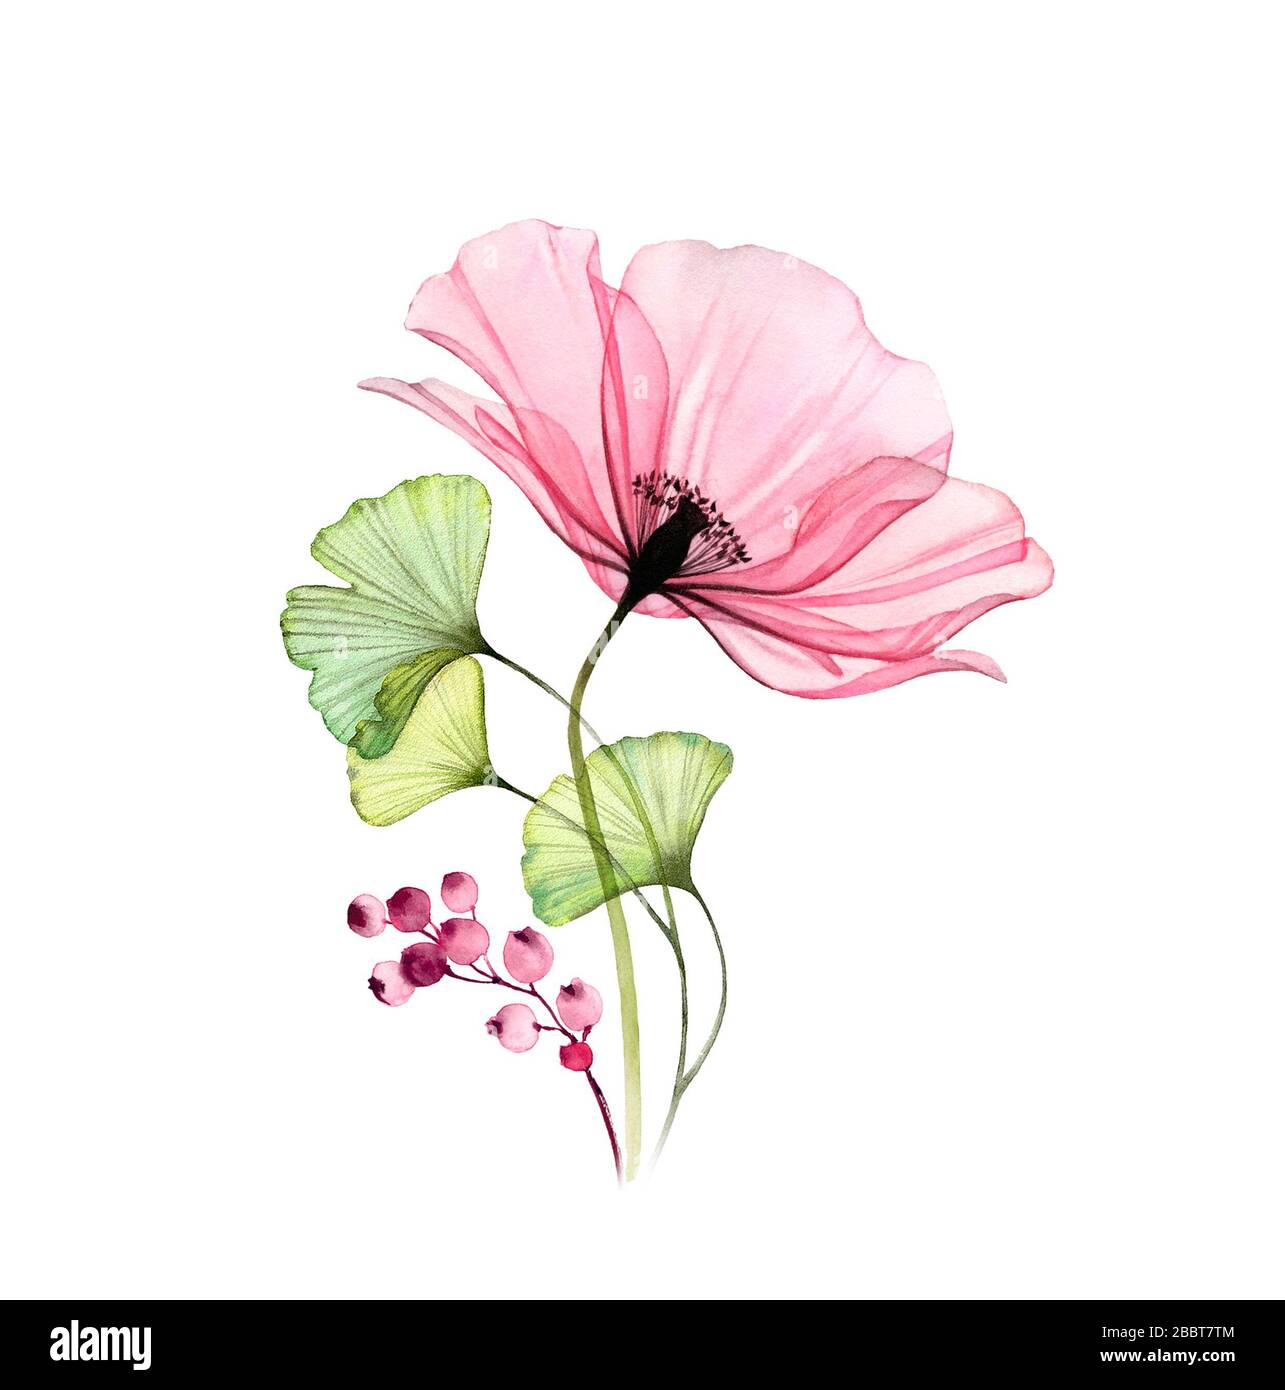 Watercolor Poppy bouquet. Big pink flower with leaves and berries isolated on white. Hand painted artwork with detailed petals. Botanical illustration Stock Photo